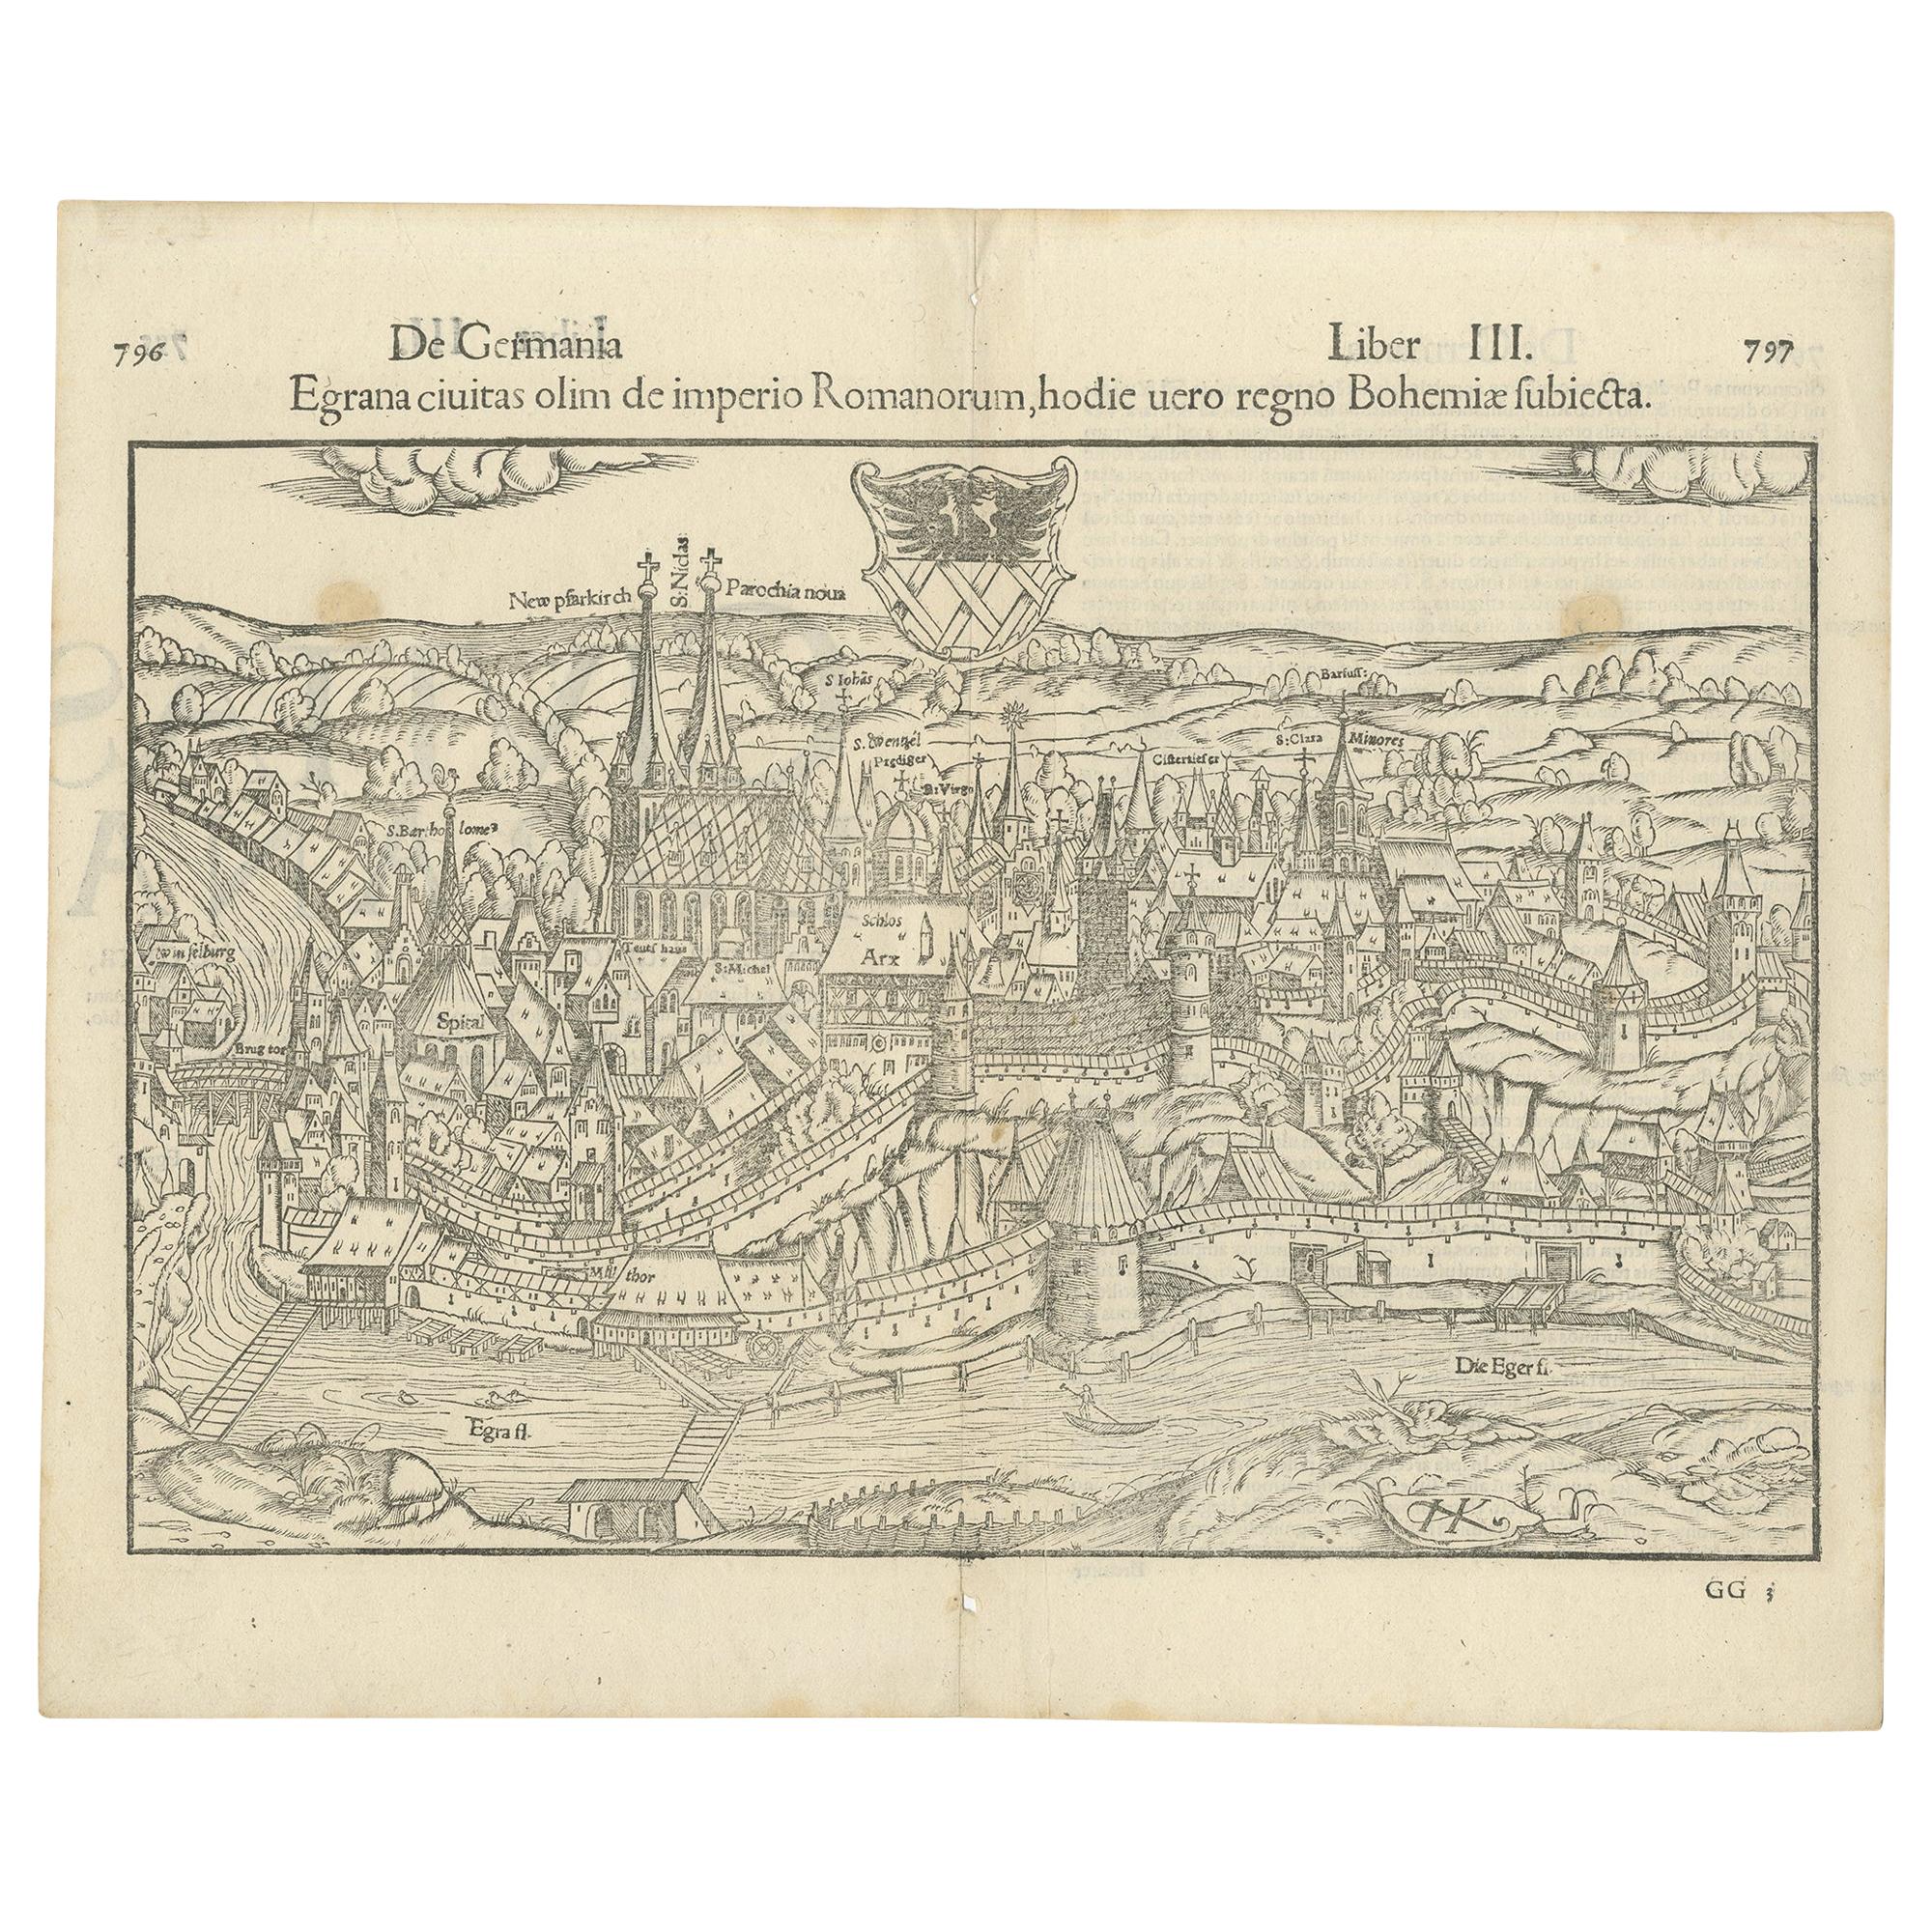 Antique Print with a View of the City of Eger 'Cheb' by Münster '1554'